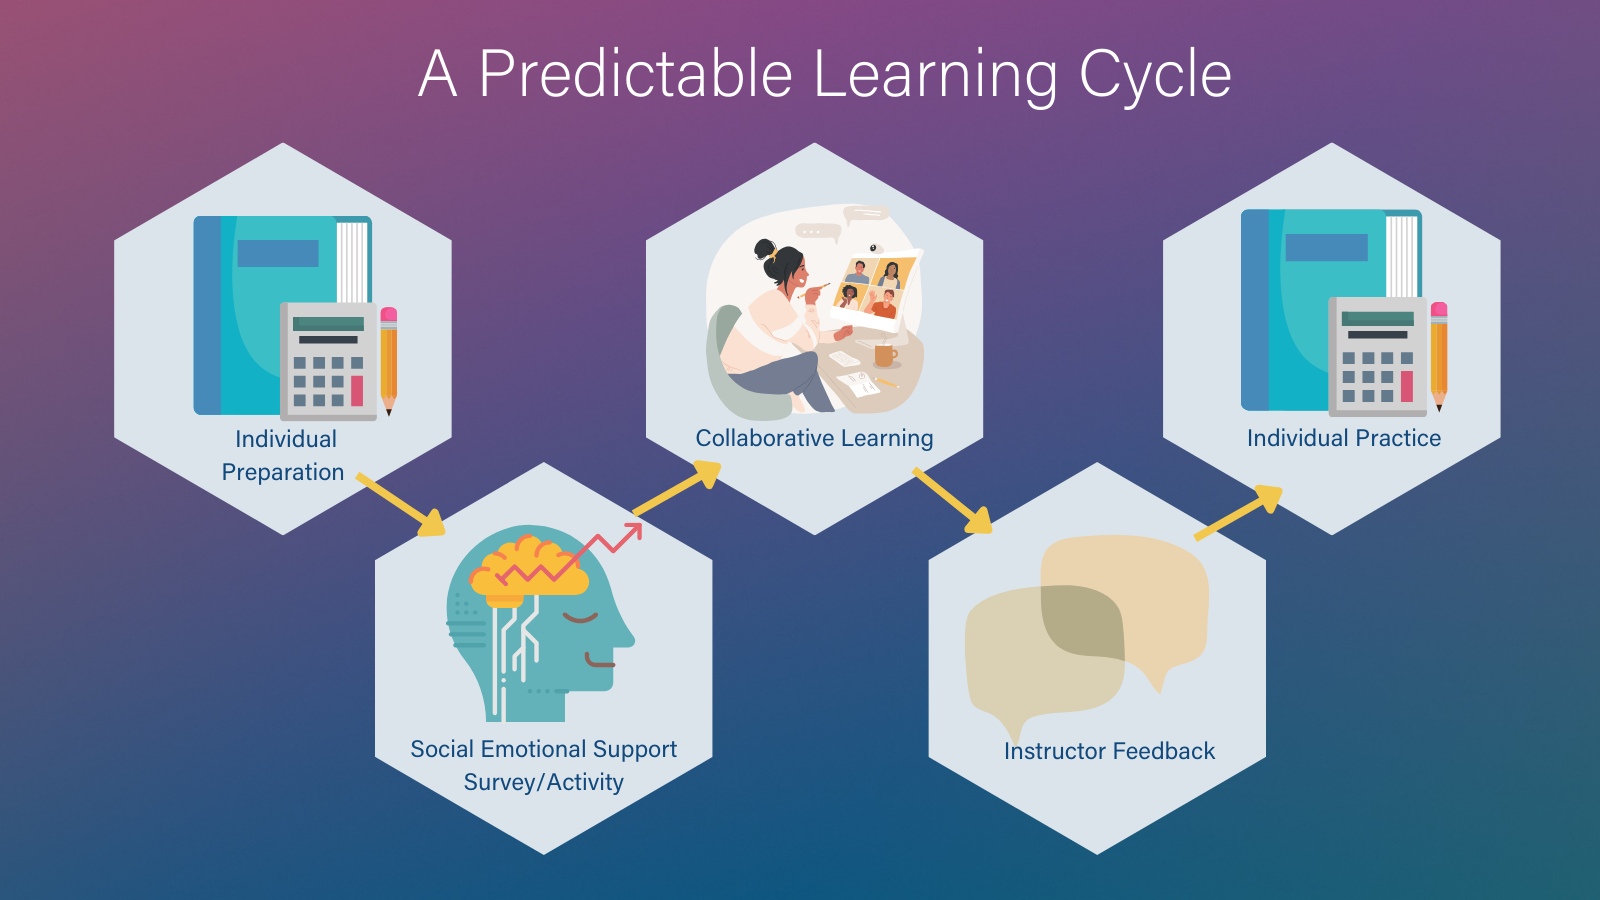 Image entitled A Predictable Learning Cycle with 5 hexagons aligned left to right. First hexagon shows an icon of paper, pencil, and calculator indicating the individual preparation stage of the cycle. Second hexagon shows icon of head and brain to indicate the social emotional activity stage of the cycle. Third hexagon shows illustrated image of woman doing video chat with a group on her computer to indicate the collaboration stage of the cycle. Fourth hexagon shows chat bubbles indicating instructor feedback stage of cycle. Fifth hexagon shows paper, pencil and calculator image to indicate individual practice stage.